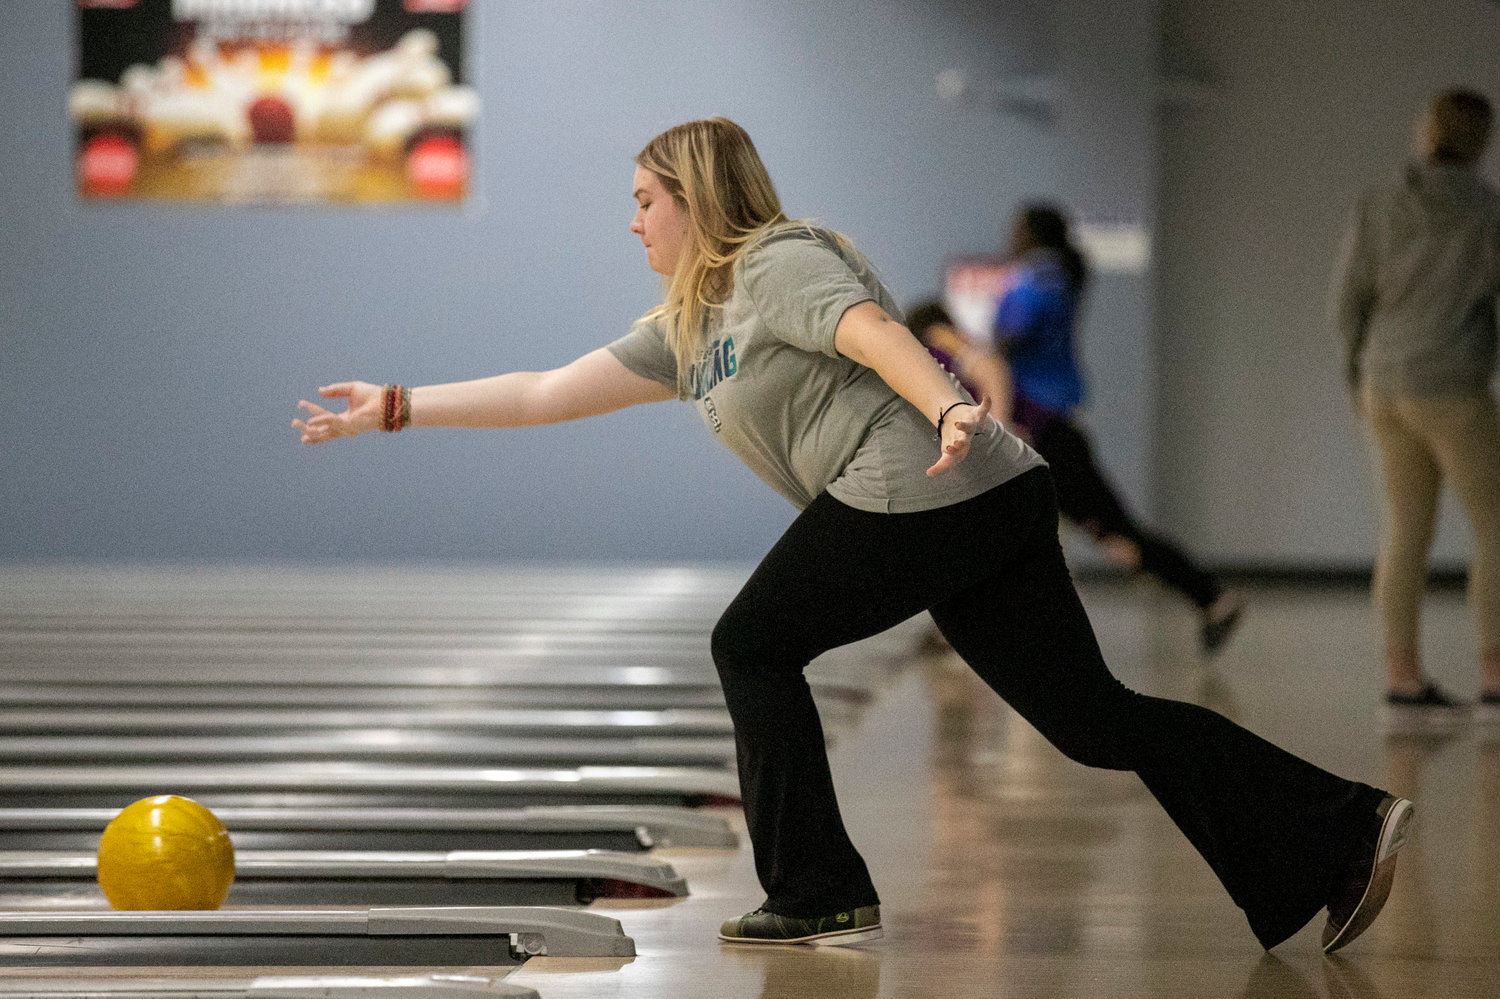 Gulf Shores’ Morgyn Jones competes during Thursday’s qualifying round of the South Regional bowling championships at Eastern Shore Lanes in Spanish Fort Thursday, Jan. 19. She helped the Dolphins earn the second seed heading into tomorrow’s single-elimination bracket.